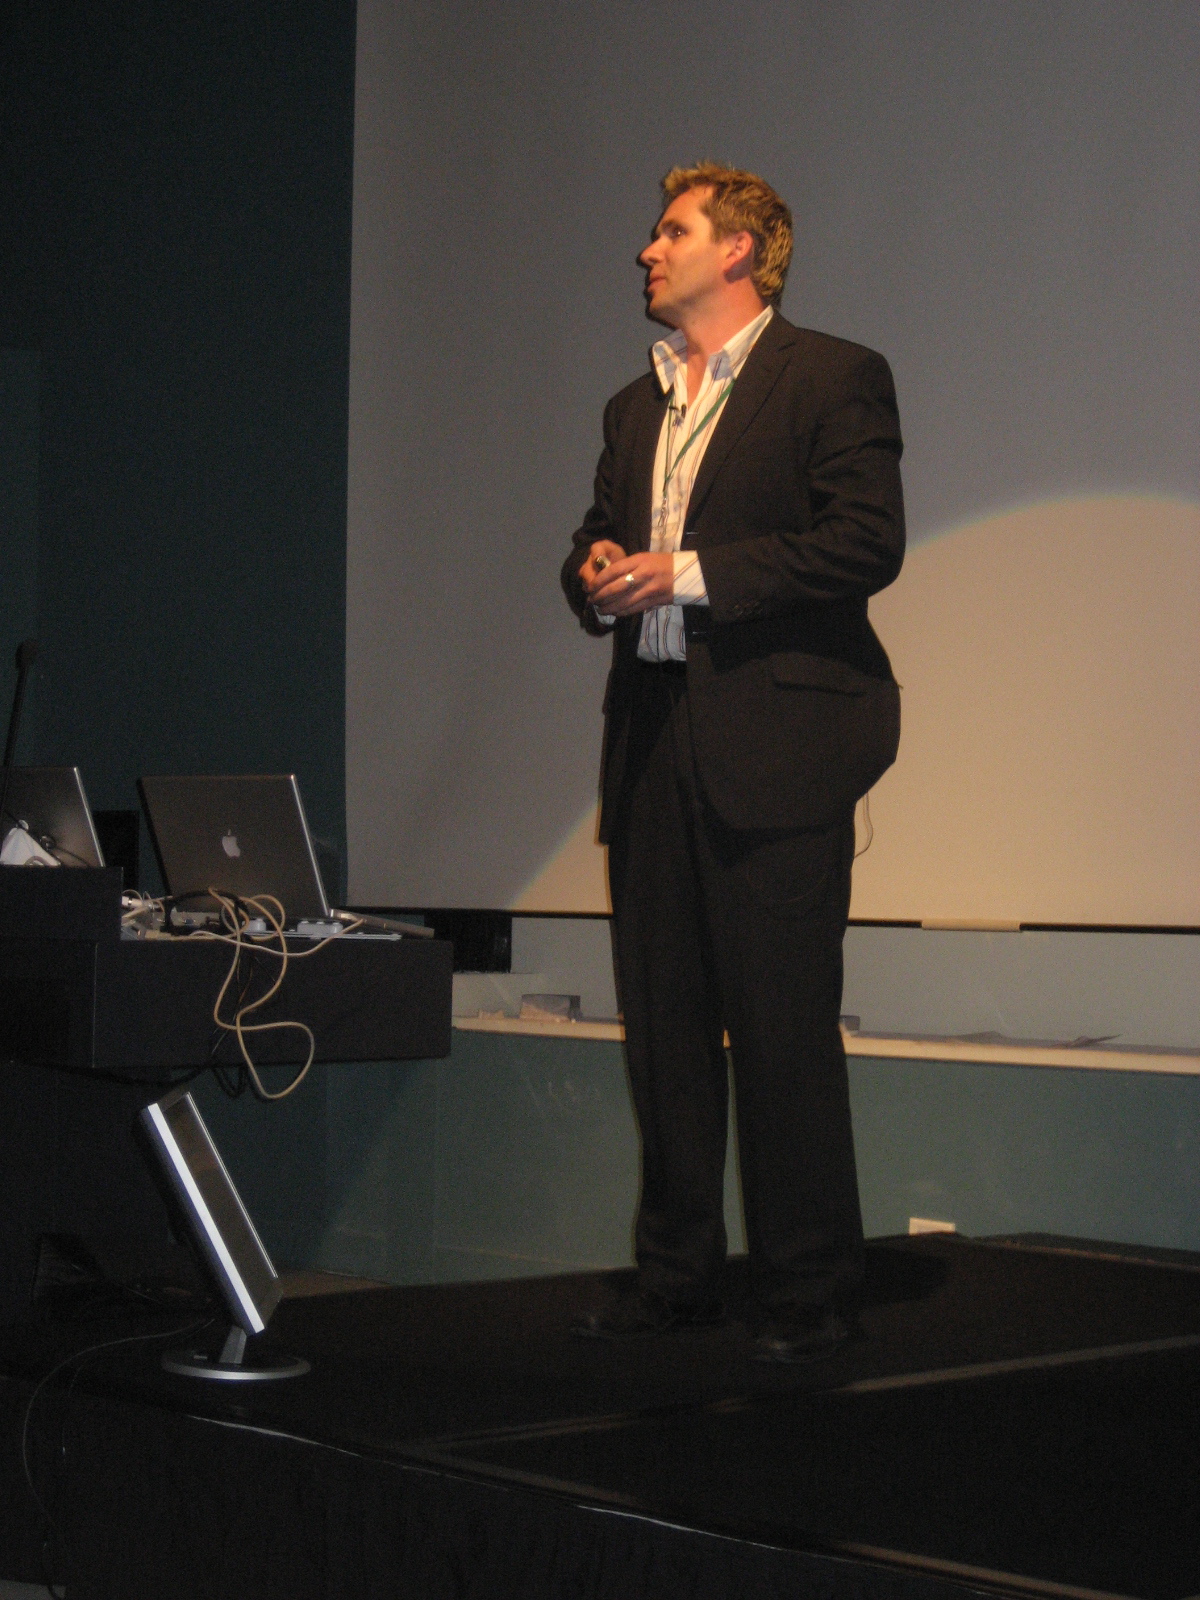 a man giving a presentation while wearing a suite